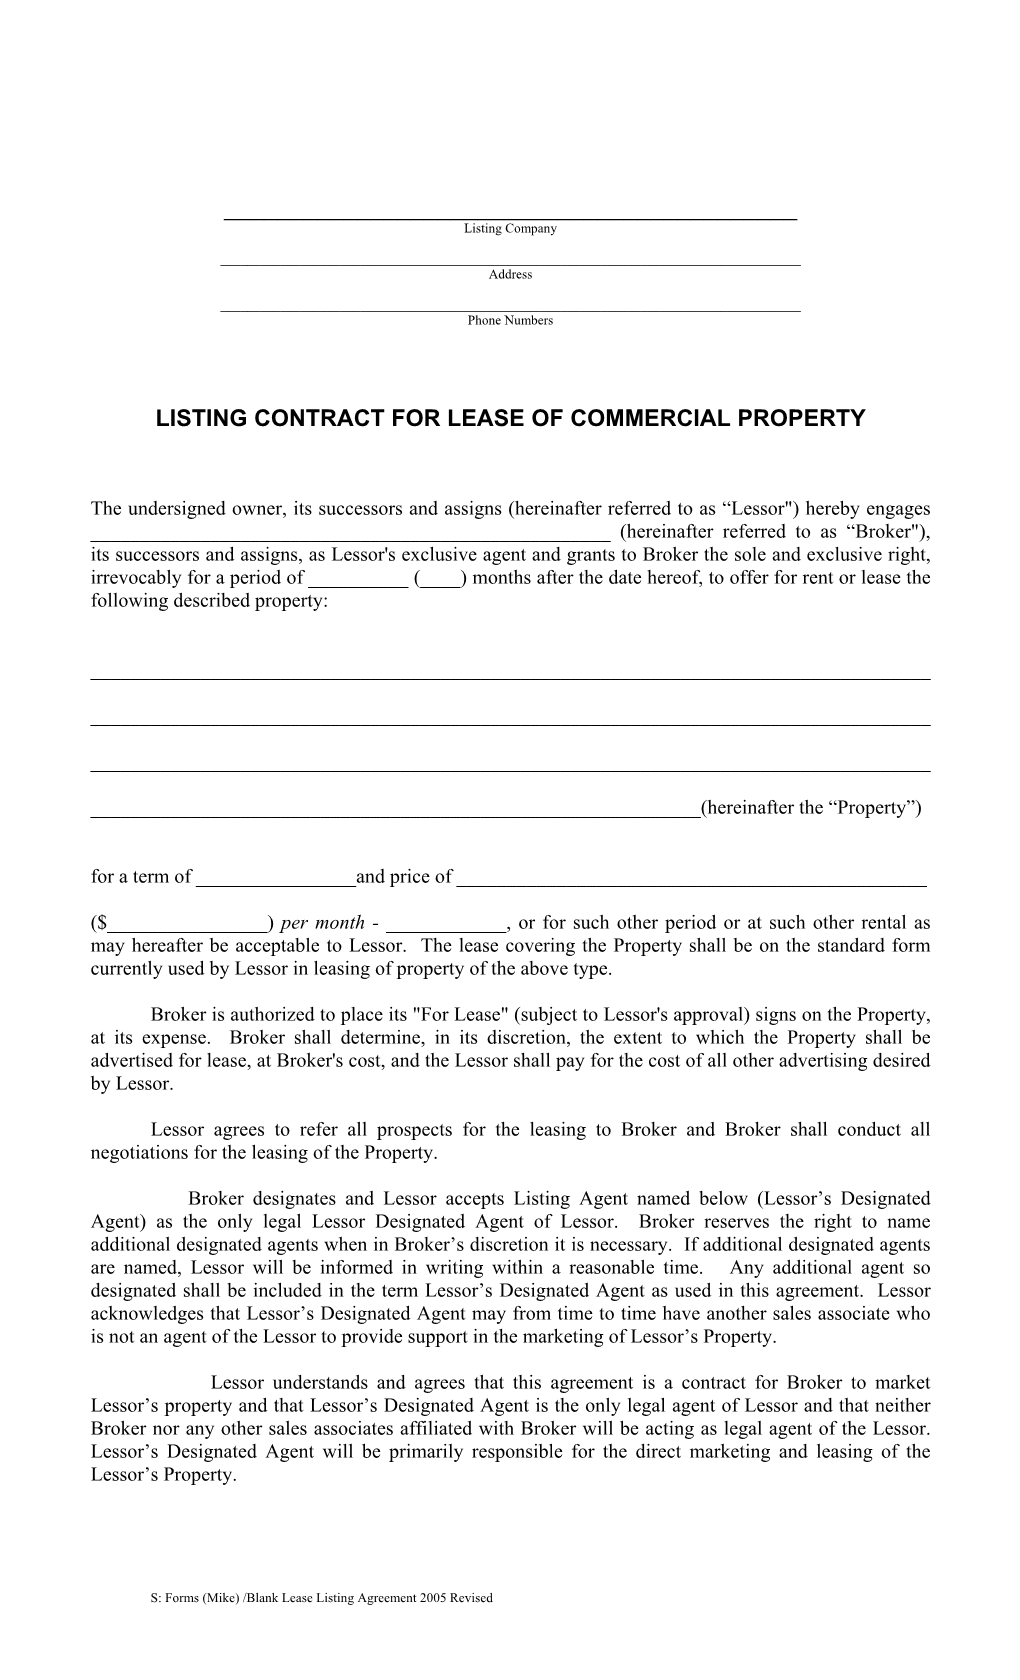 Listing Contract for Lease of Commercial Property